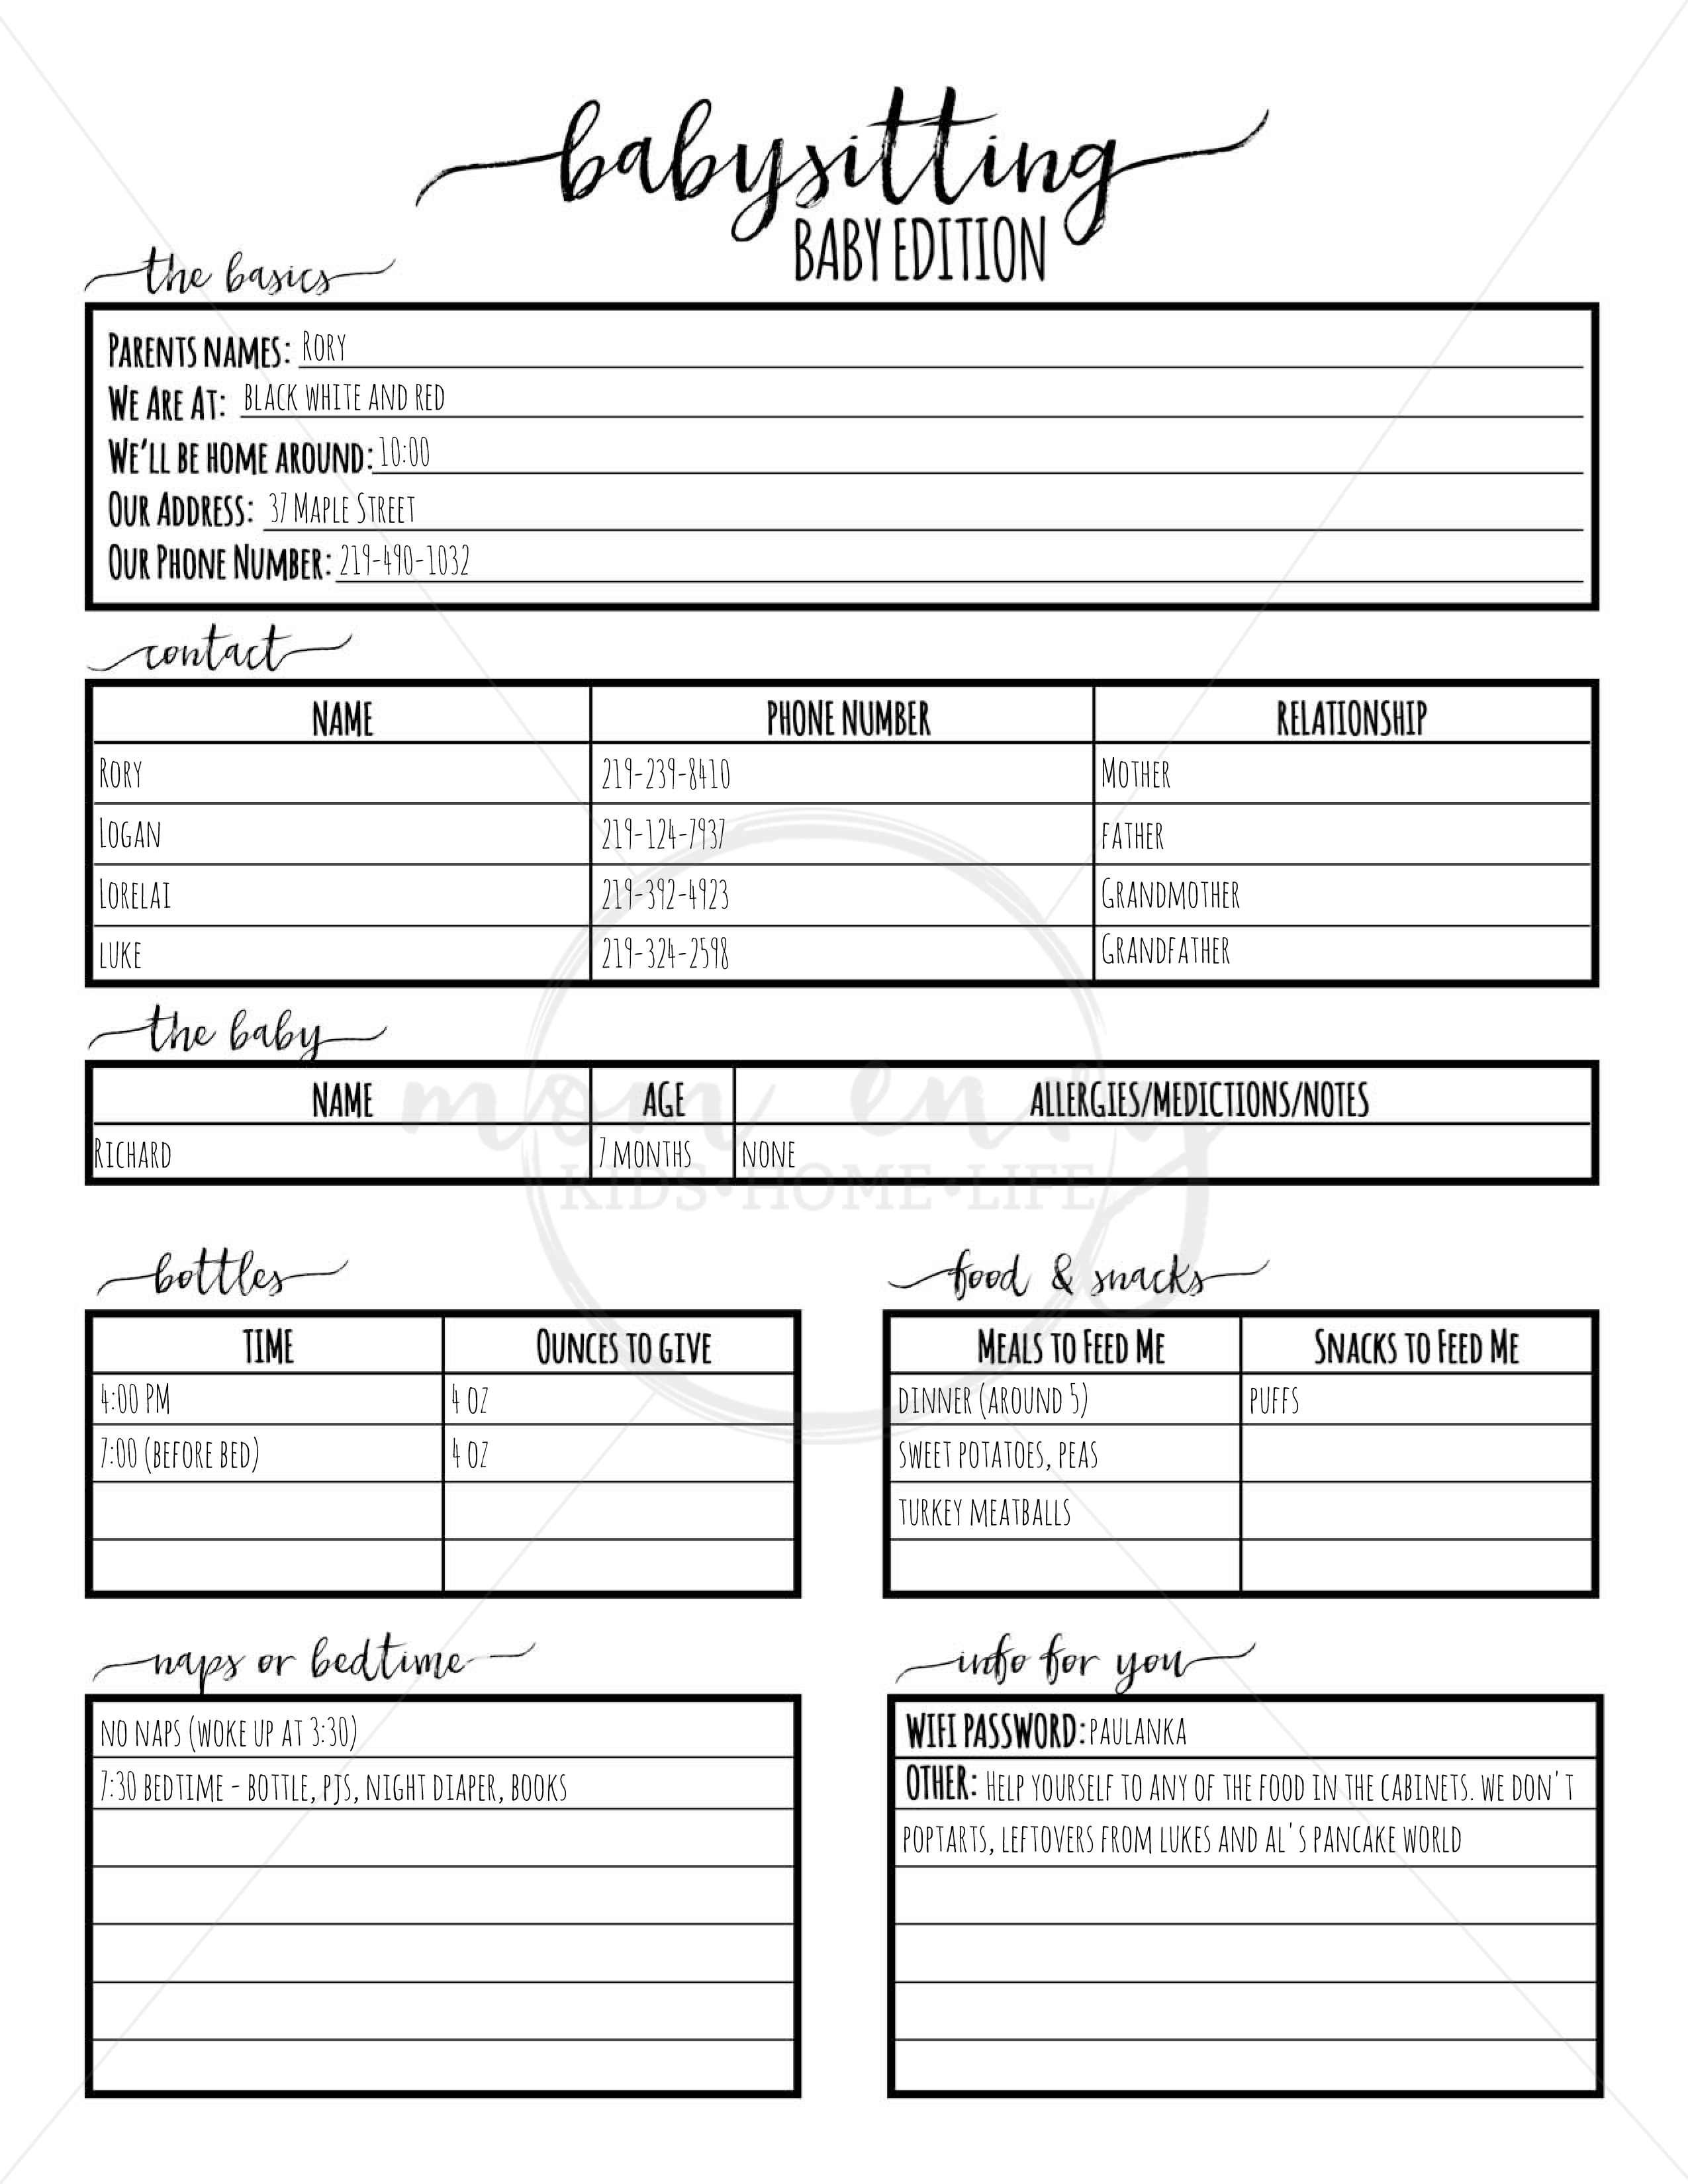 Babysitter Forms, Daycare Forms, &amp;amp; Other Parent Forms - Free Printable Parent Information Sheet